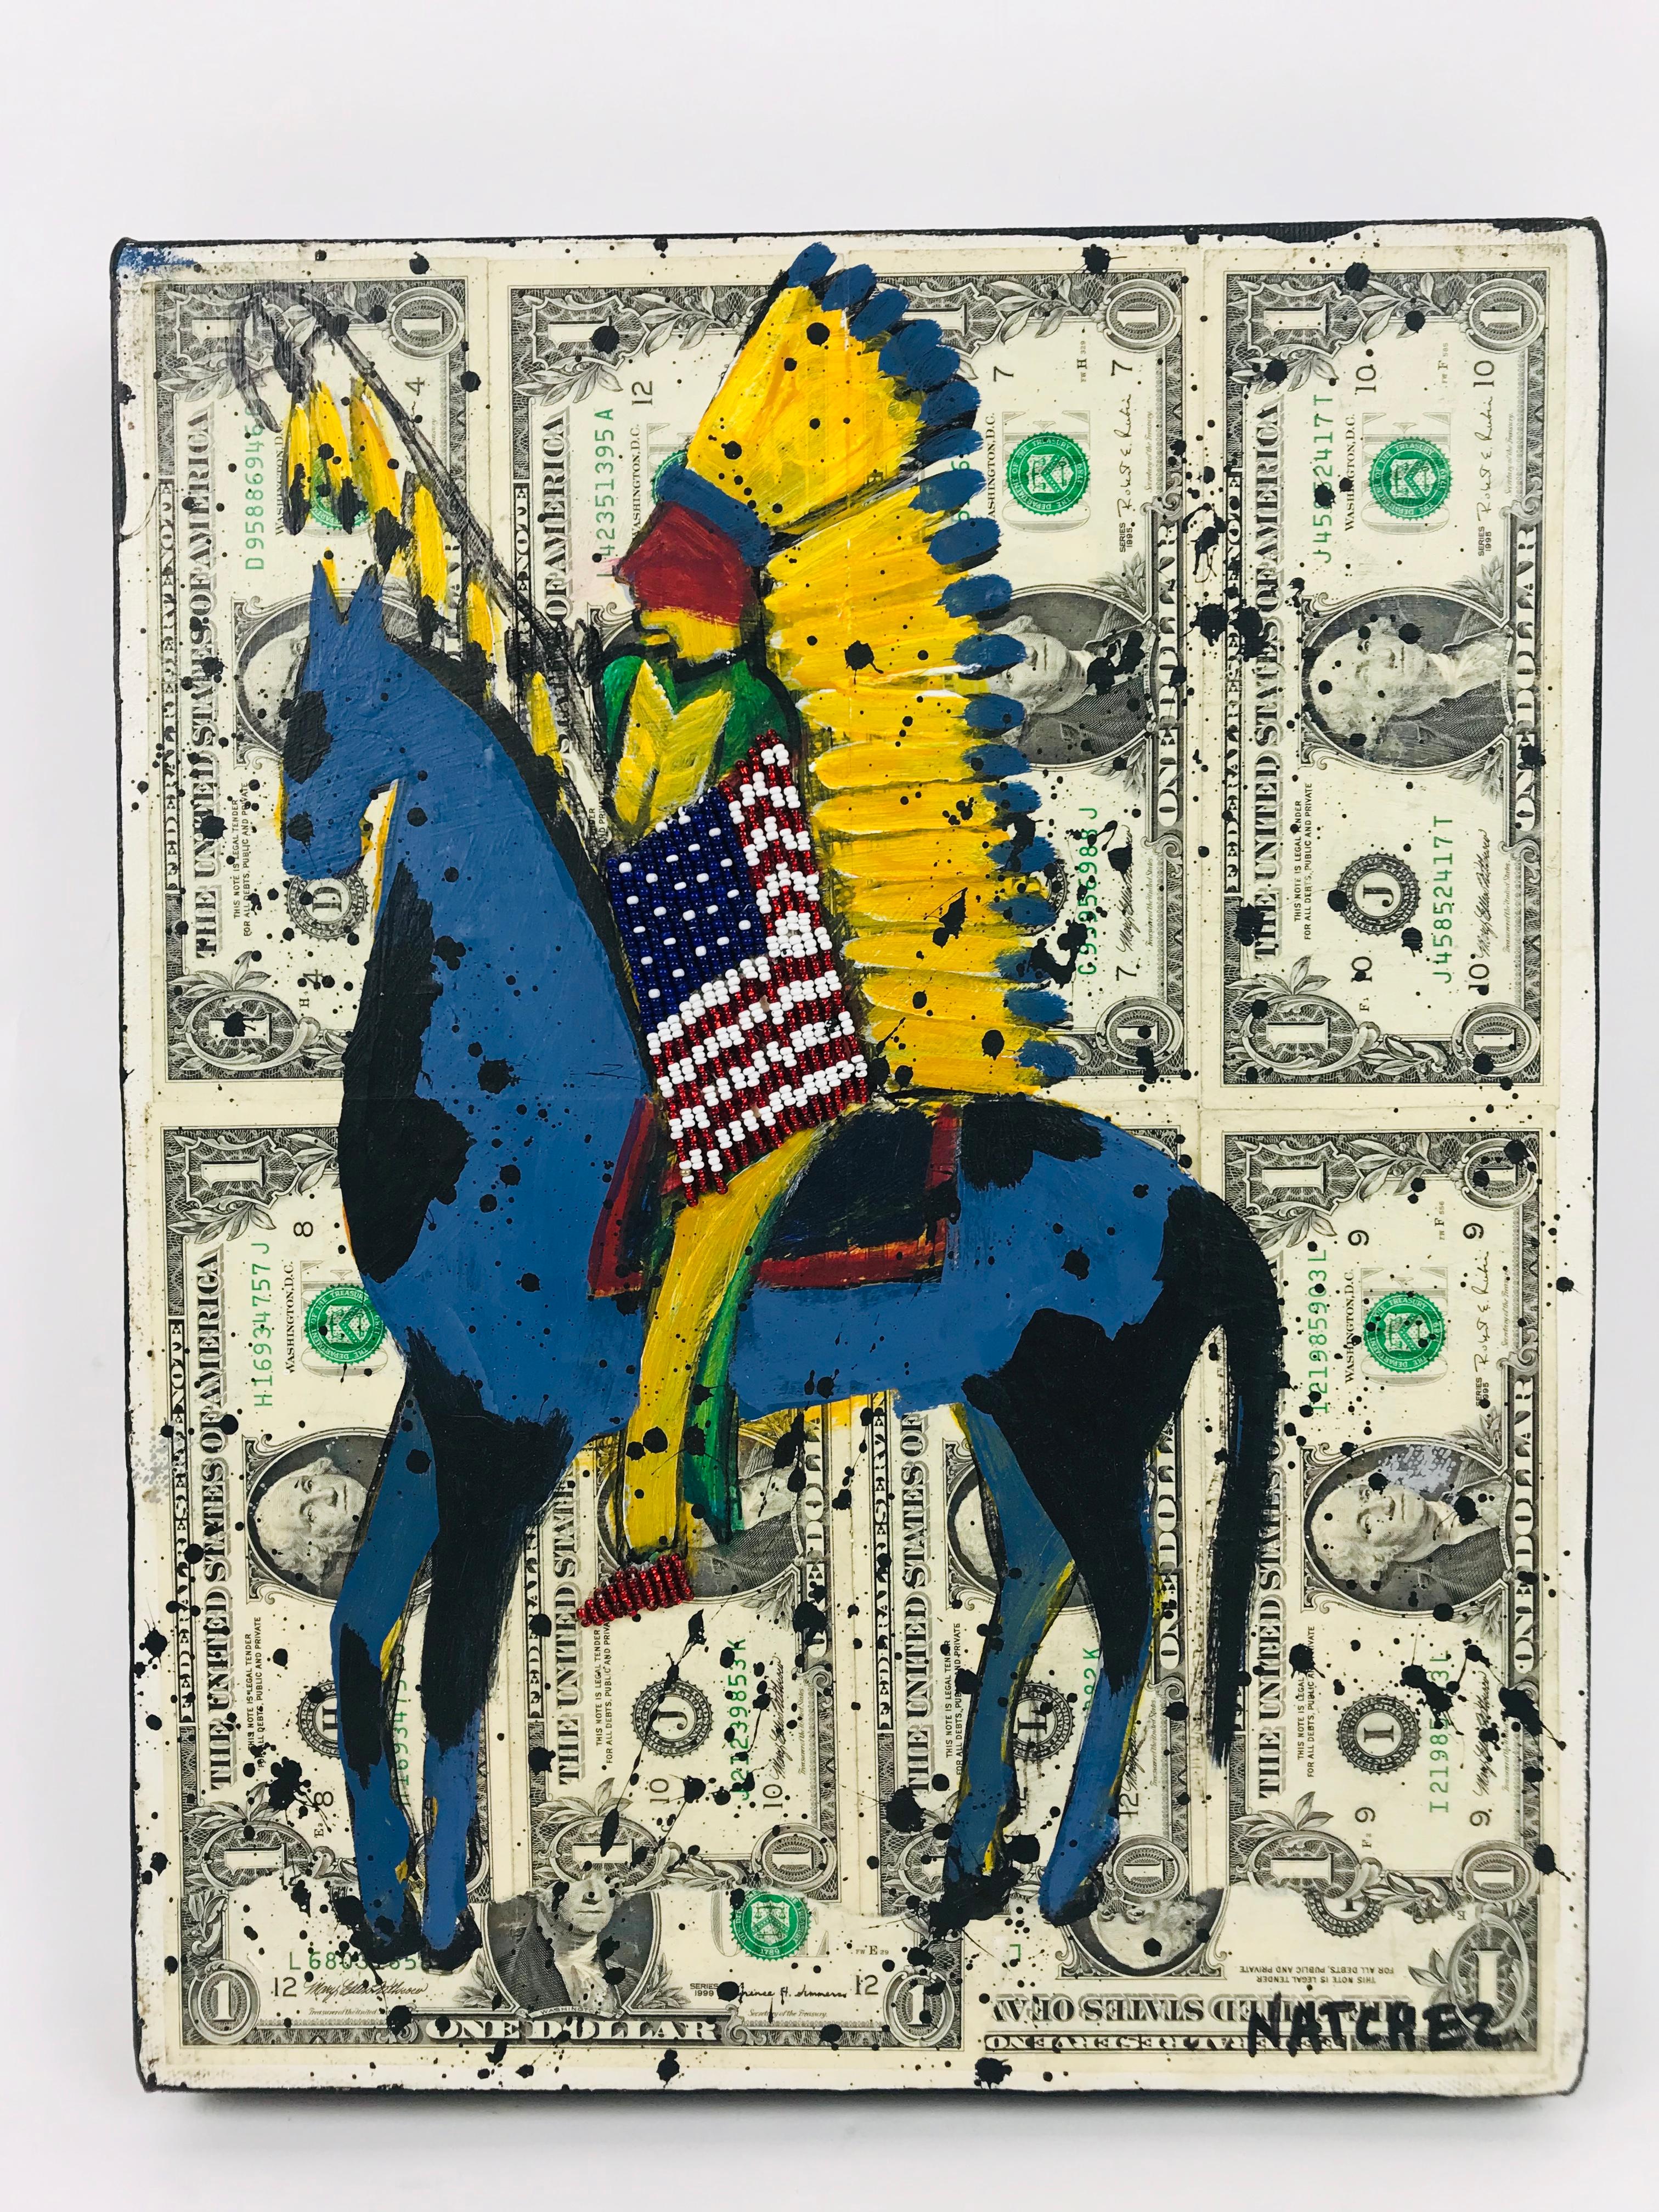 An exceptional oil on canvas modern painting by Stan Natchez. An Indian chief on his horse is seen in profile against the backgound of one dollar bills. His American flag is adorned with beads. This piece encapsulates the absurdity and beauty of